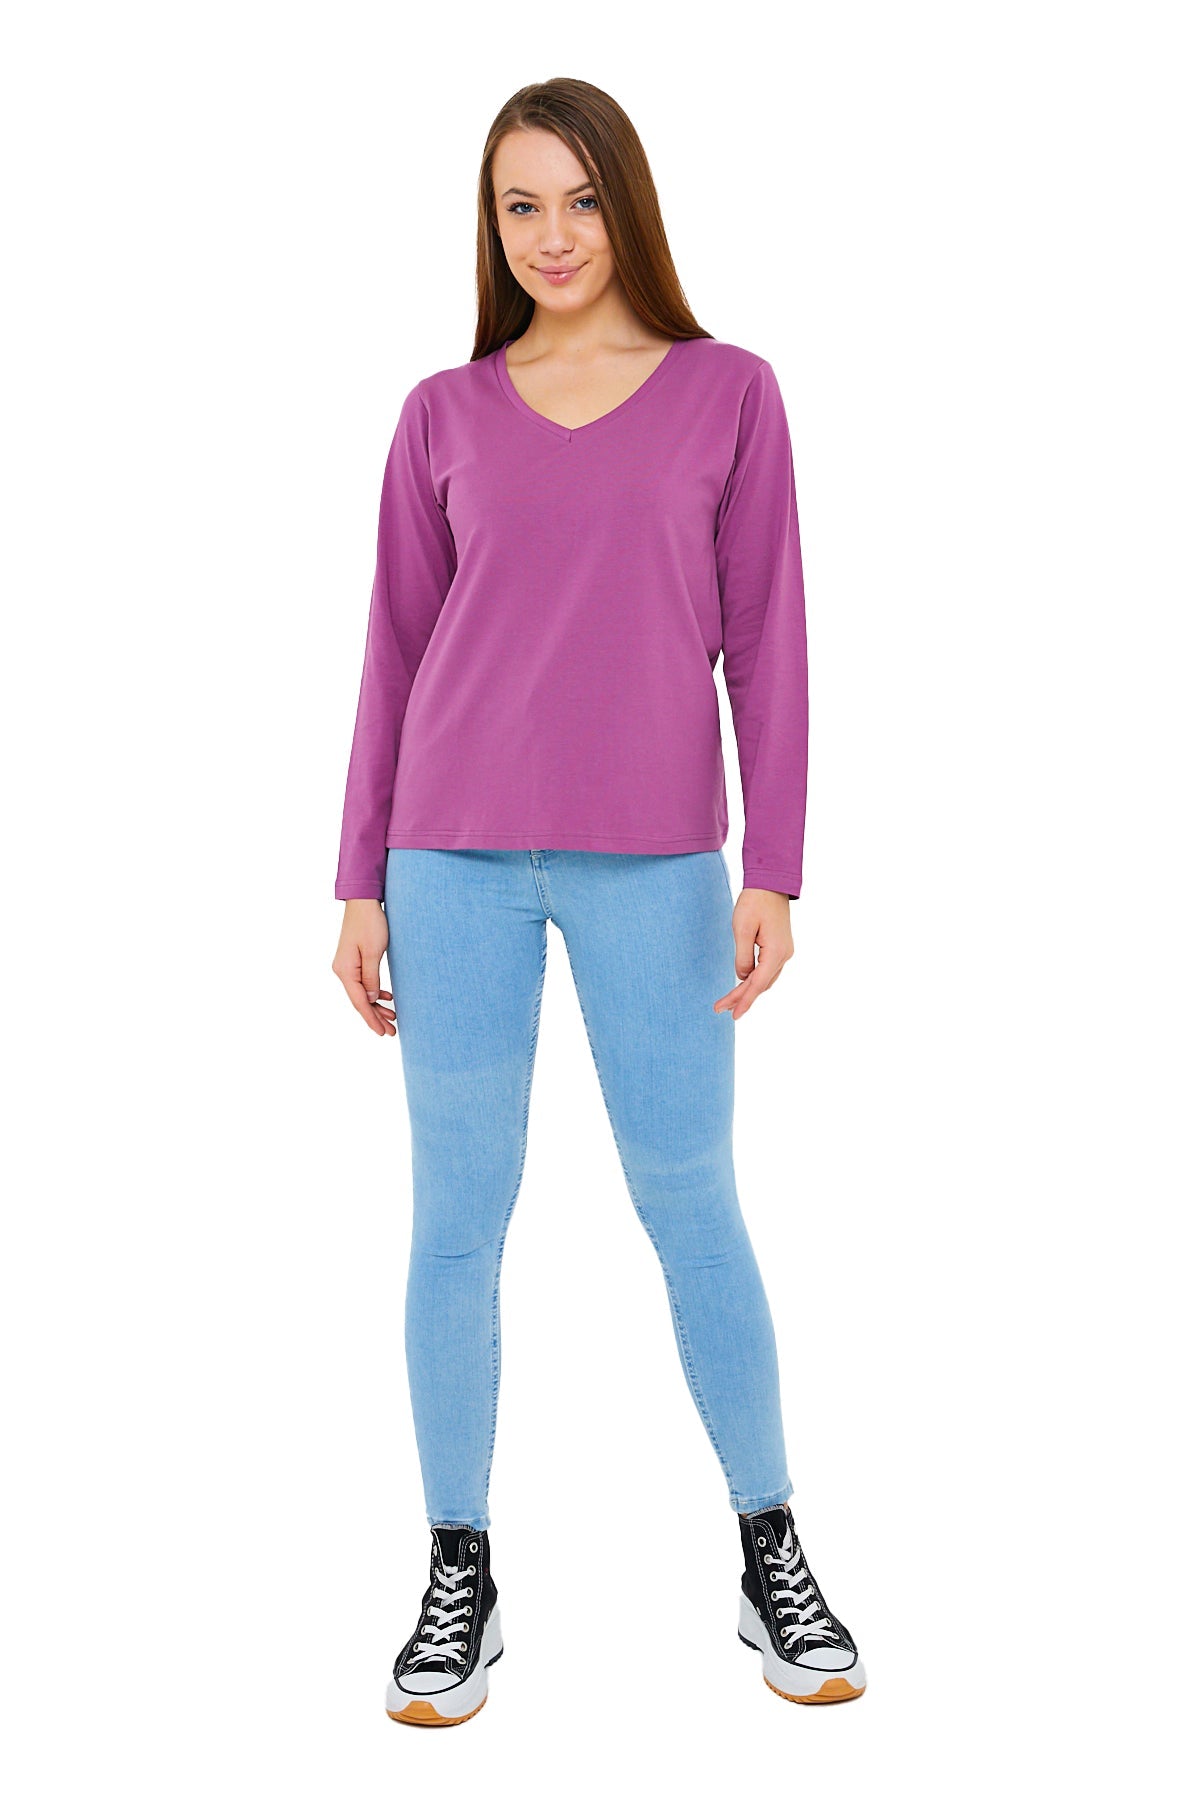 Long Sleeve V Neck T-Shirts for Women & Girls - Colorful Pima Cotton-150